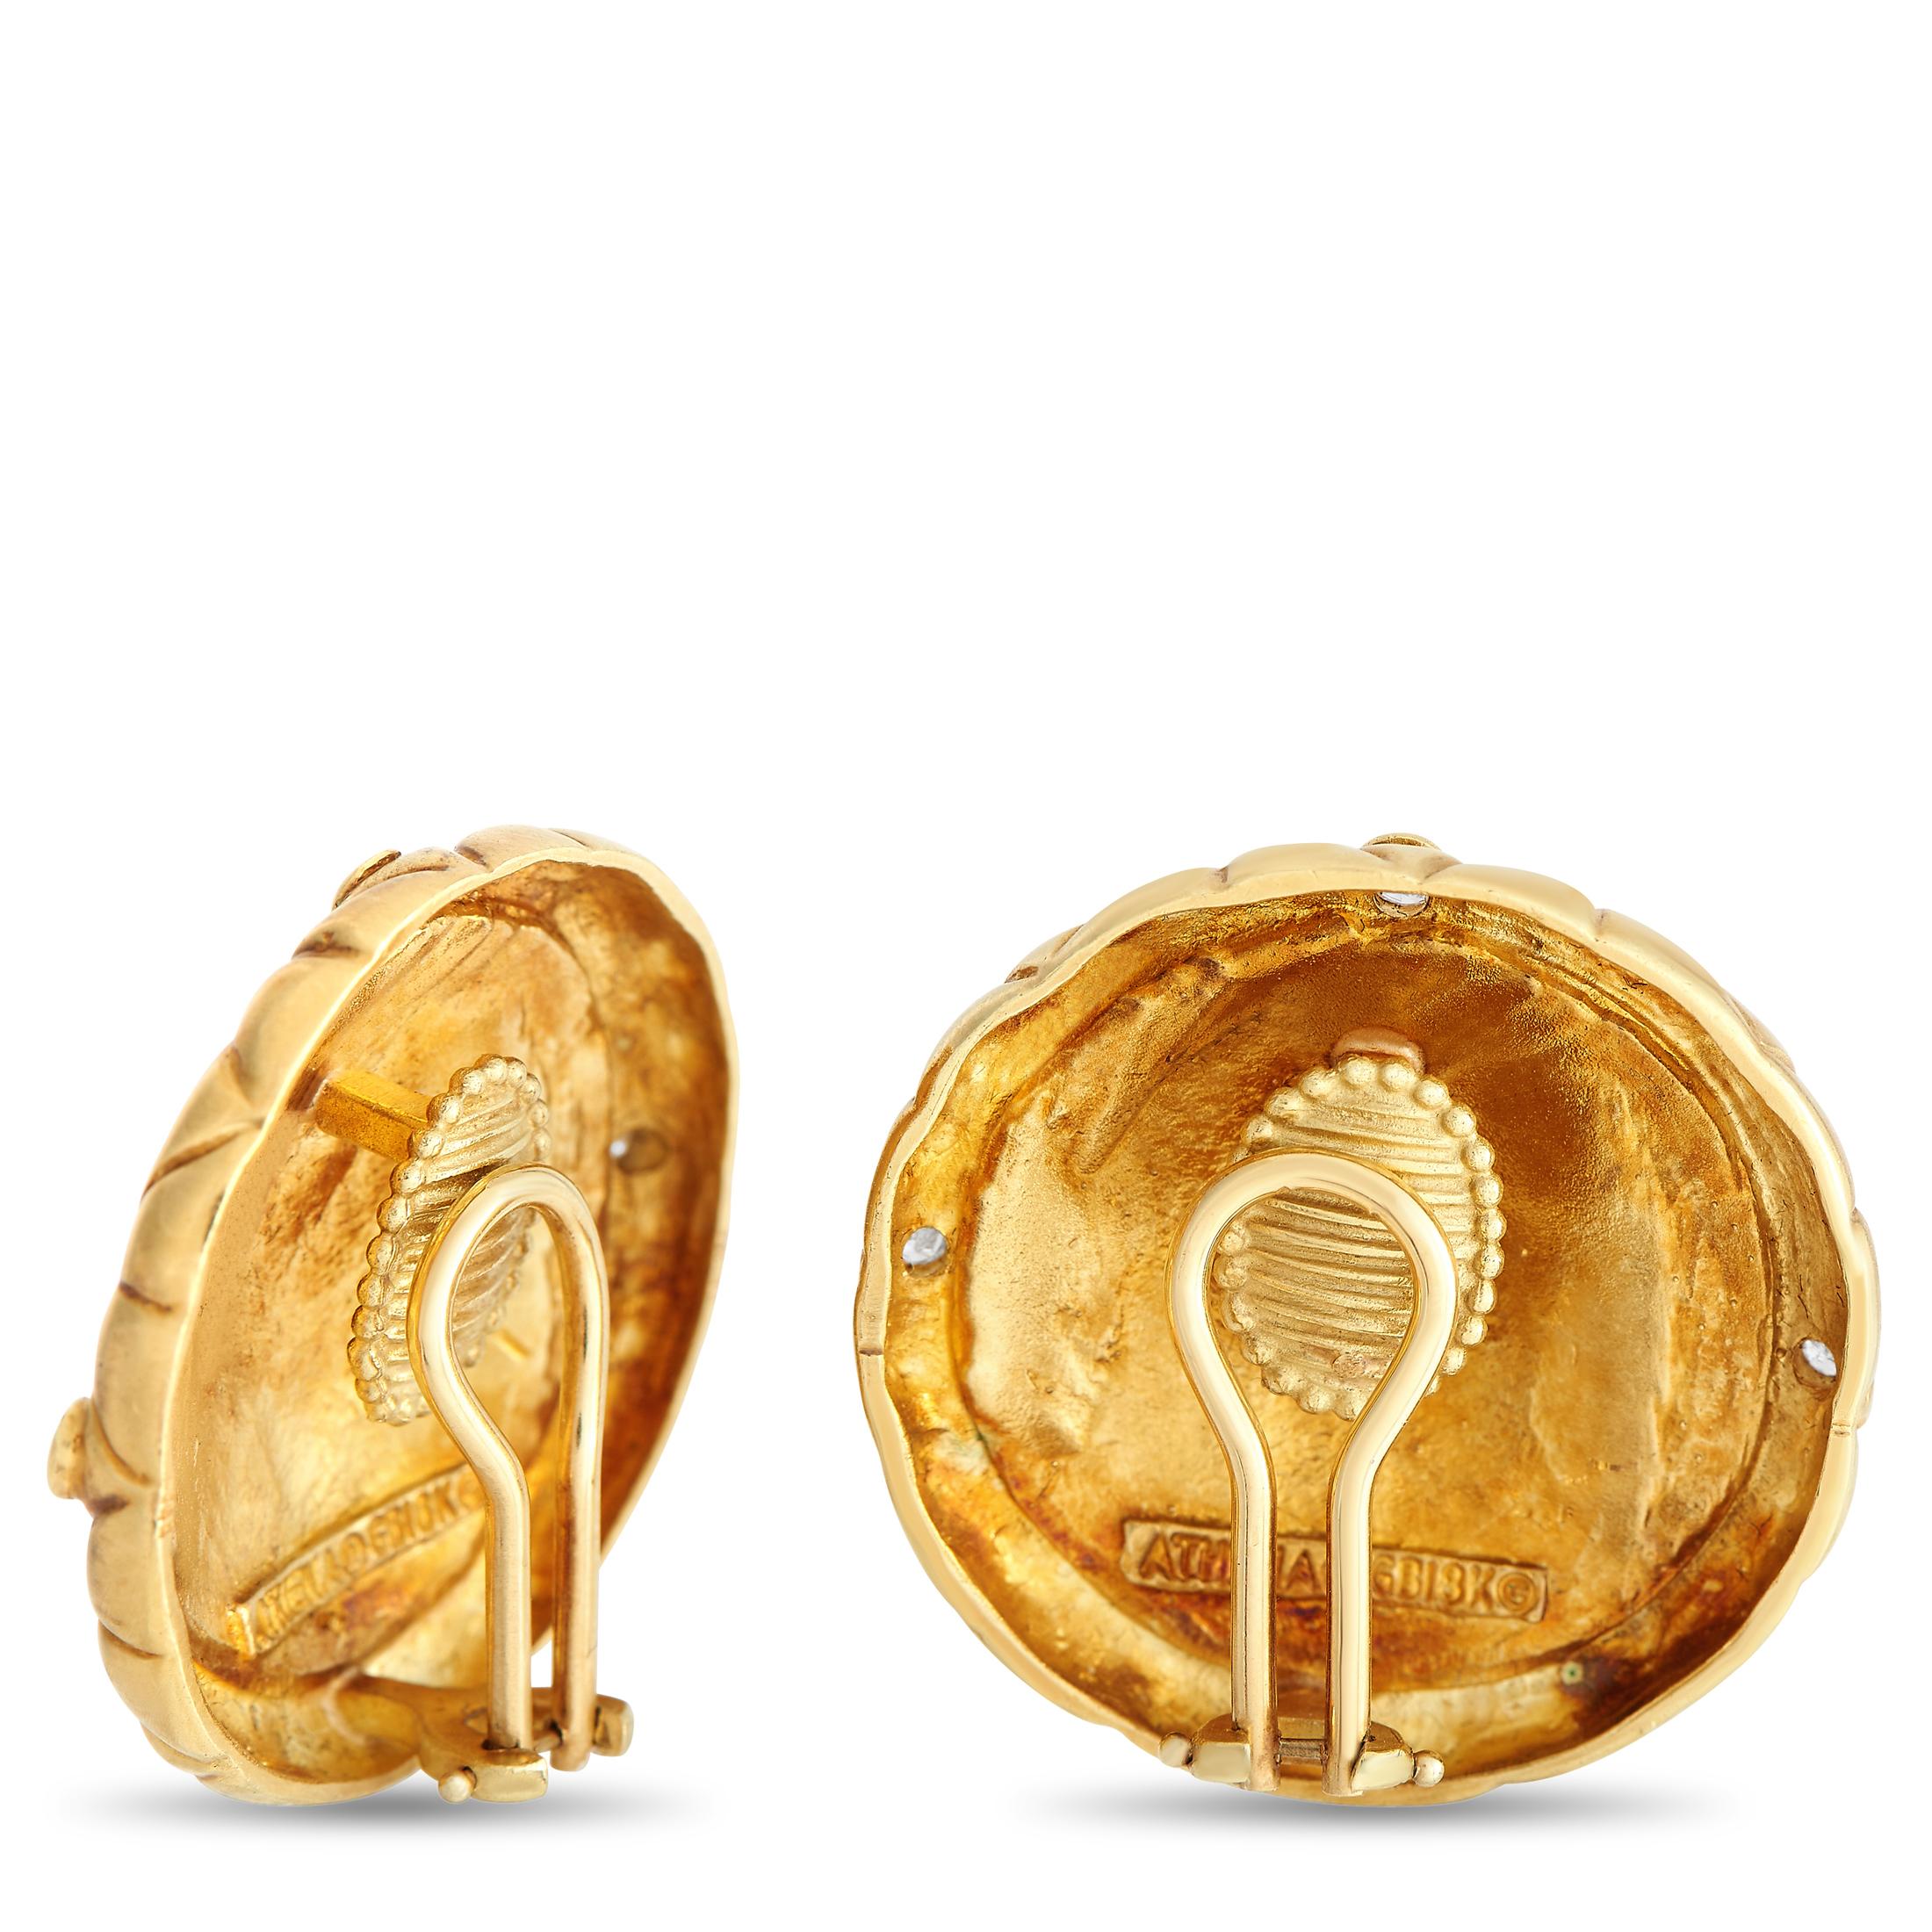 Renew your love for vintage dressing with this pair of antique-inspired SeidenGang coin clip-on earrings. Fashioned from 18K yellow gold are 1.25-inch clip-on earrings with a bas-relief detail depicting the Greek god Hermes. Four round diamonds